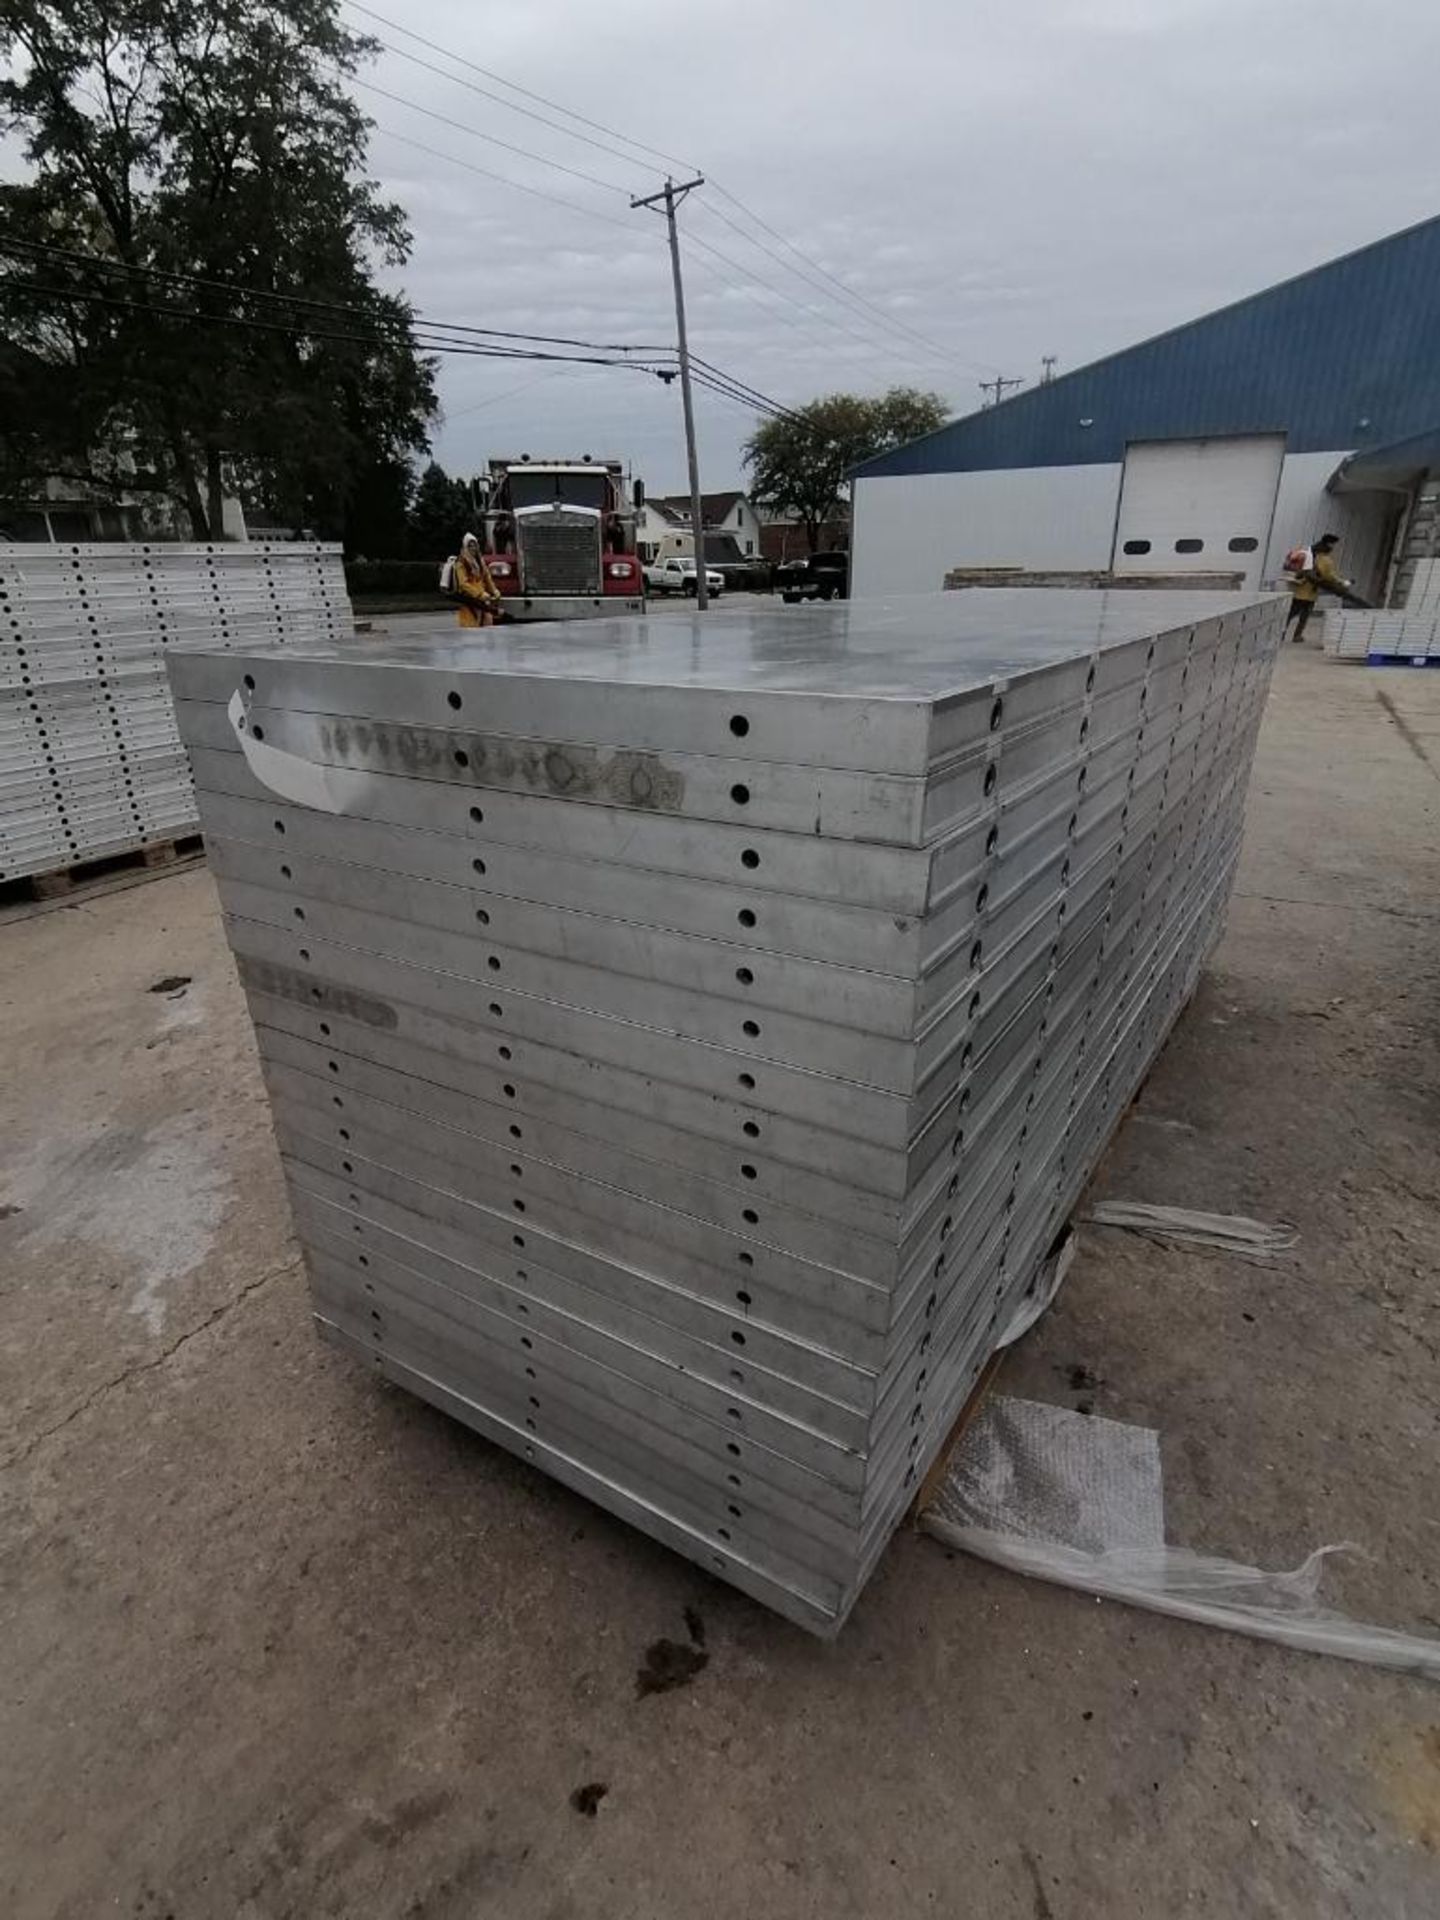 (20) 36" X 9' NEW Badger Smooth Aluminum Concrete Forms 6-12 Hole Pattern. Located in Mt.